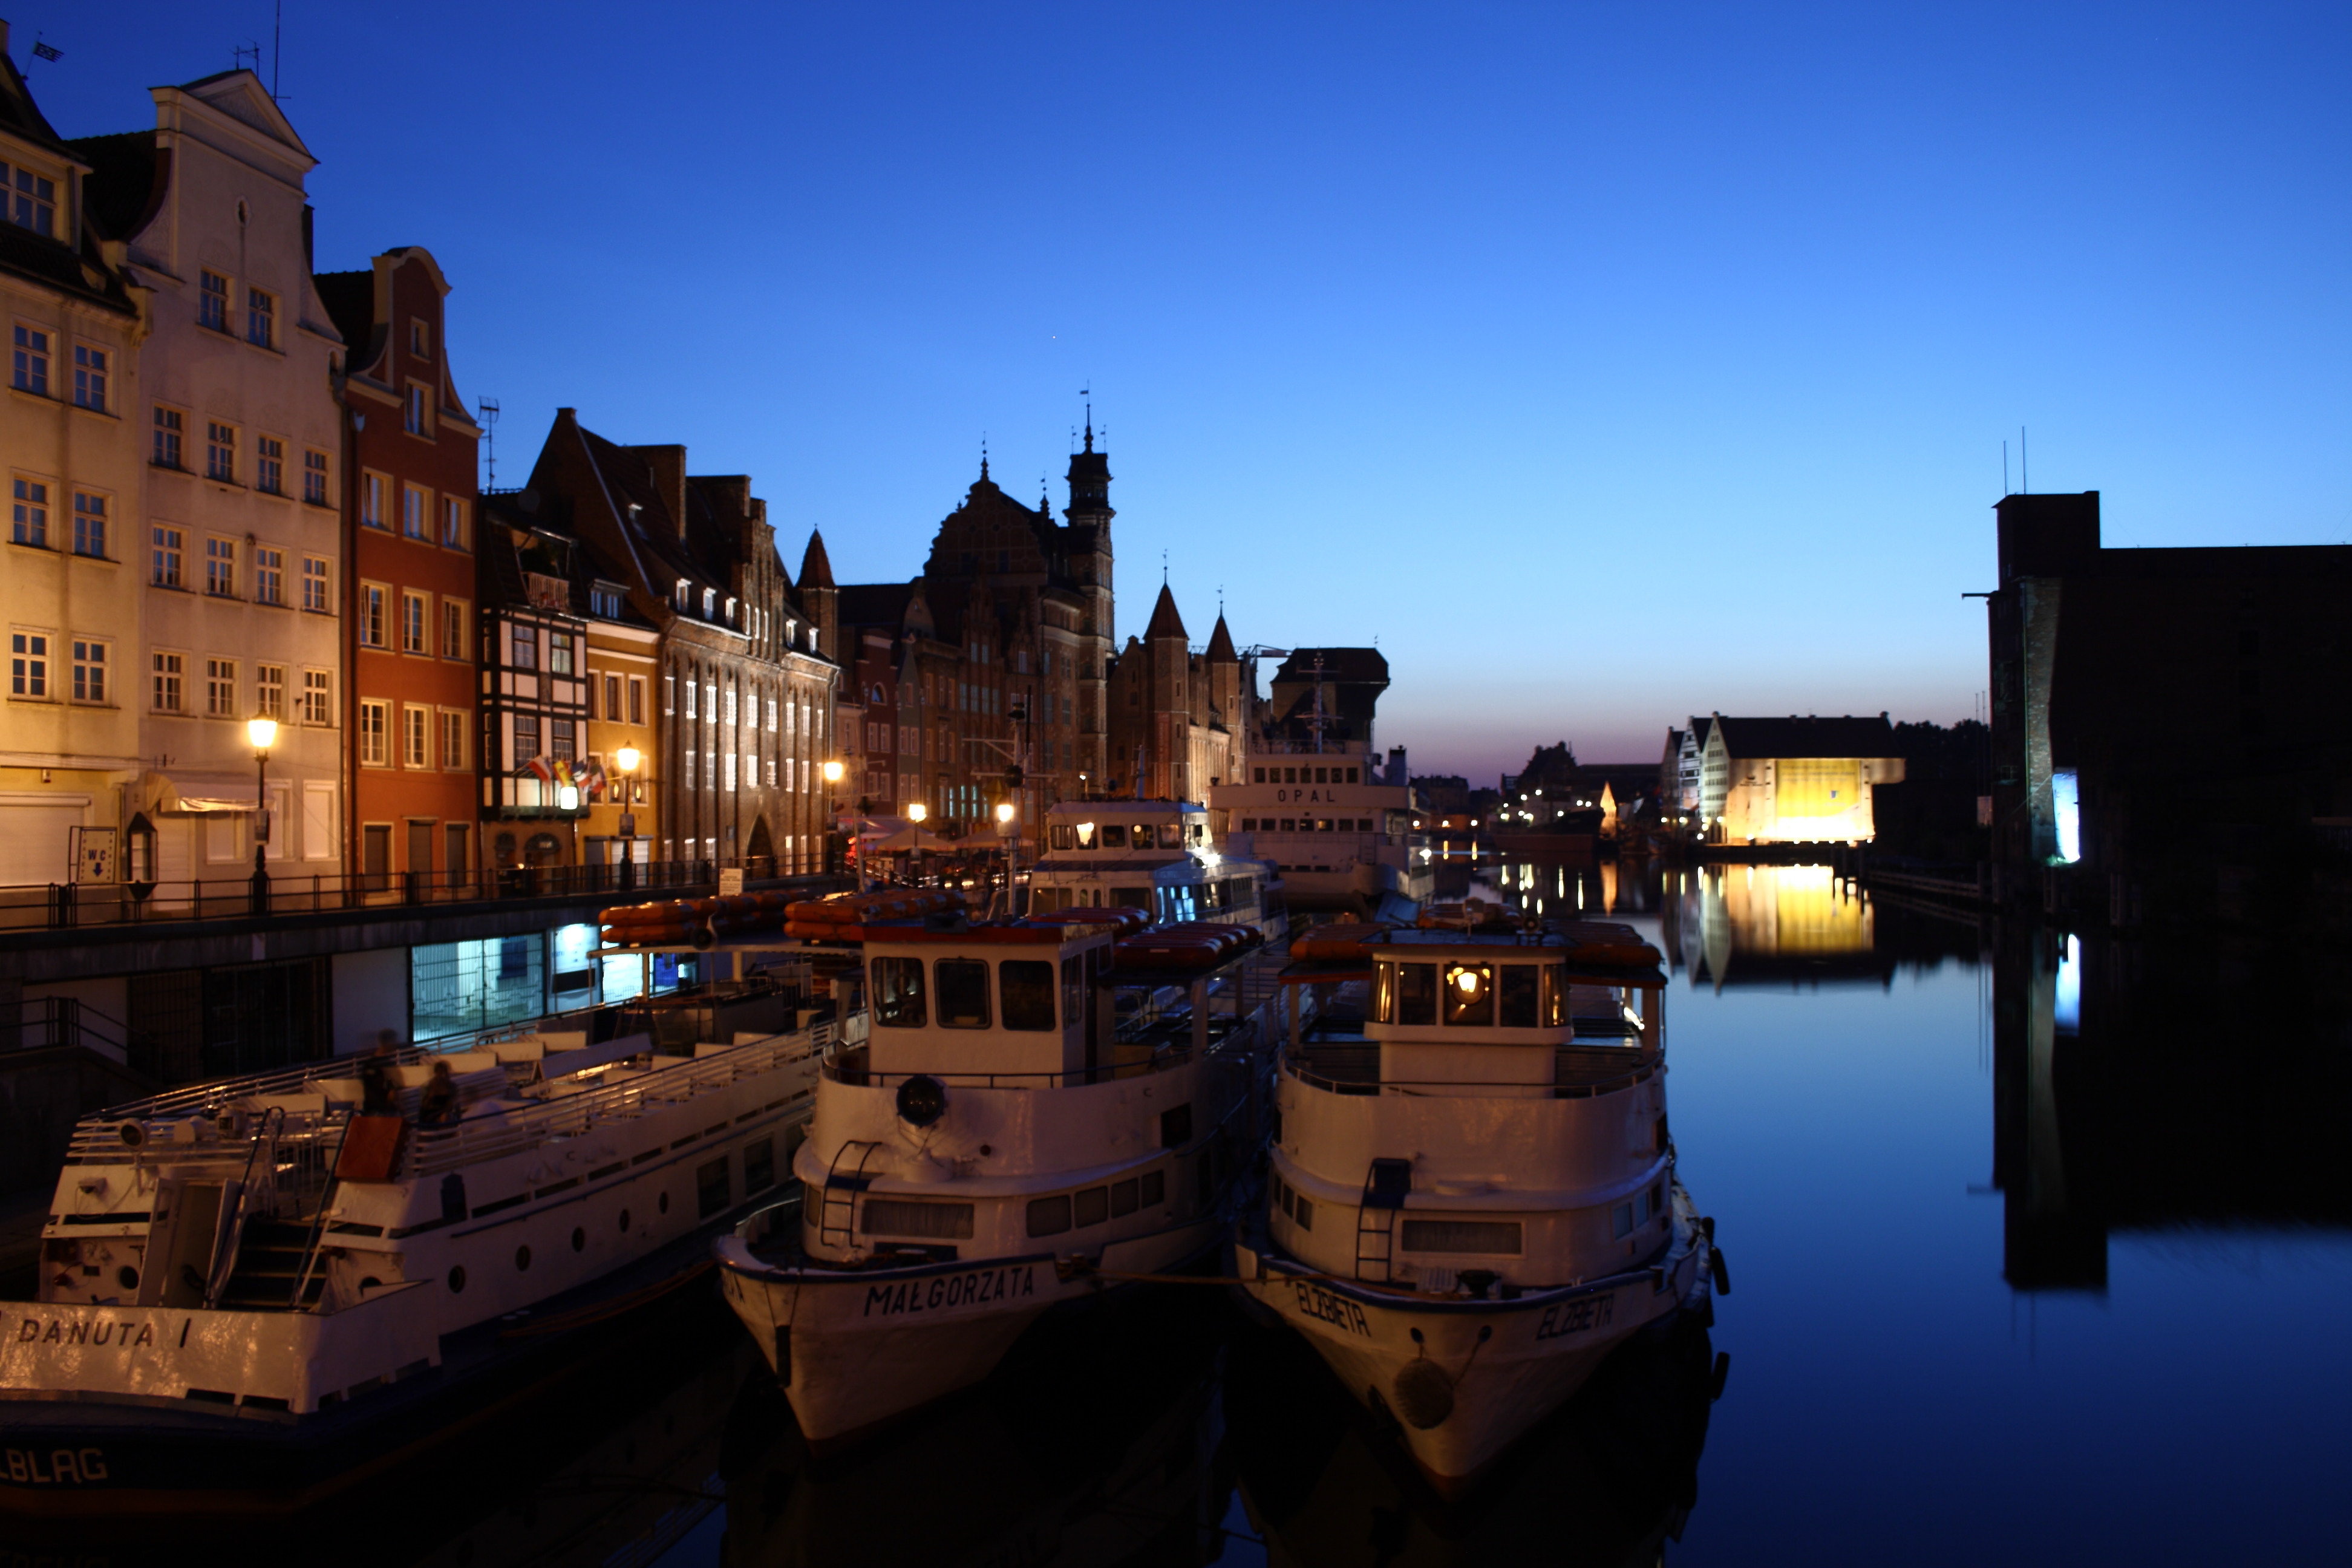 Light before dawn in Gdańsk during Wikimania 2010